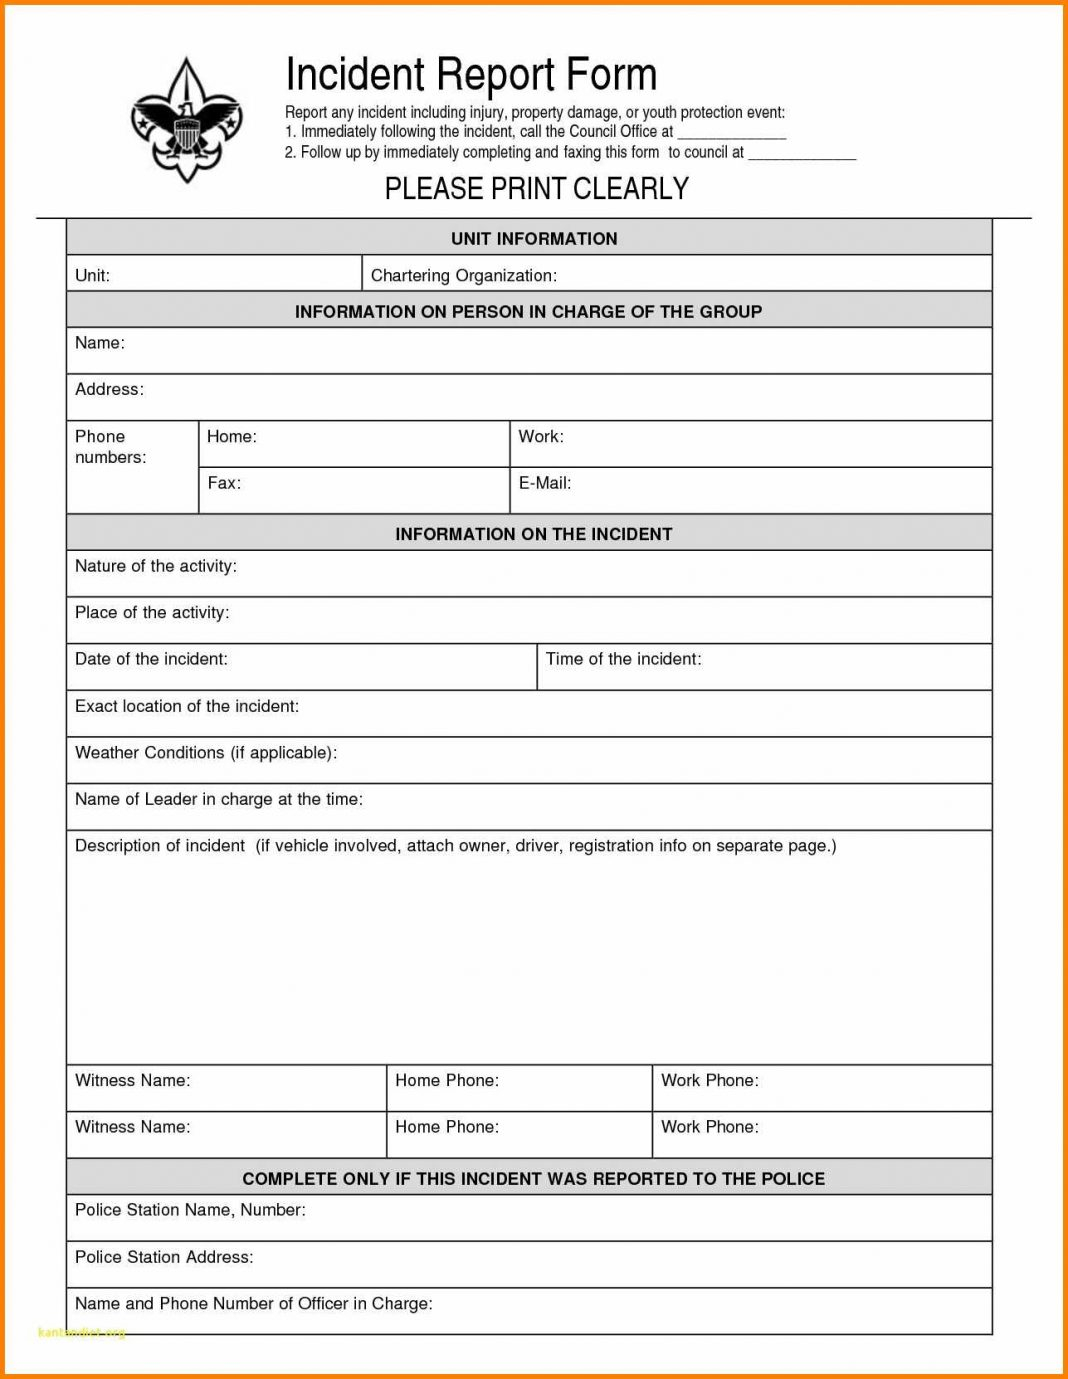 Employee Incident Report Is Your Company In Need For An Intended For Incident Report Form Template Qld